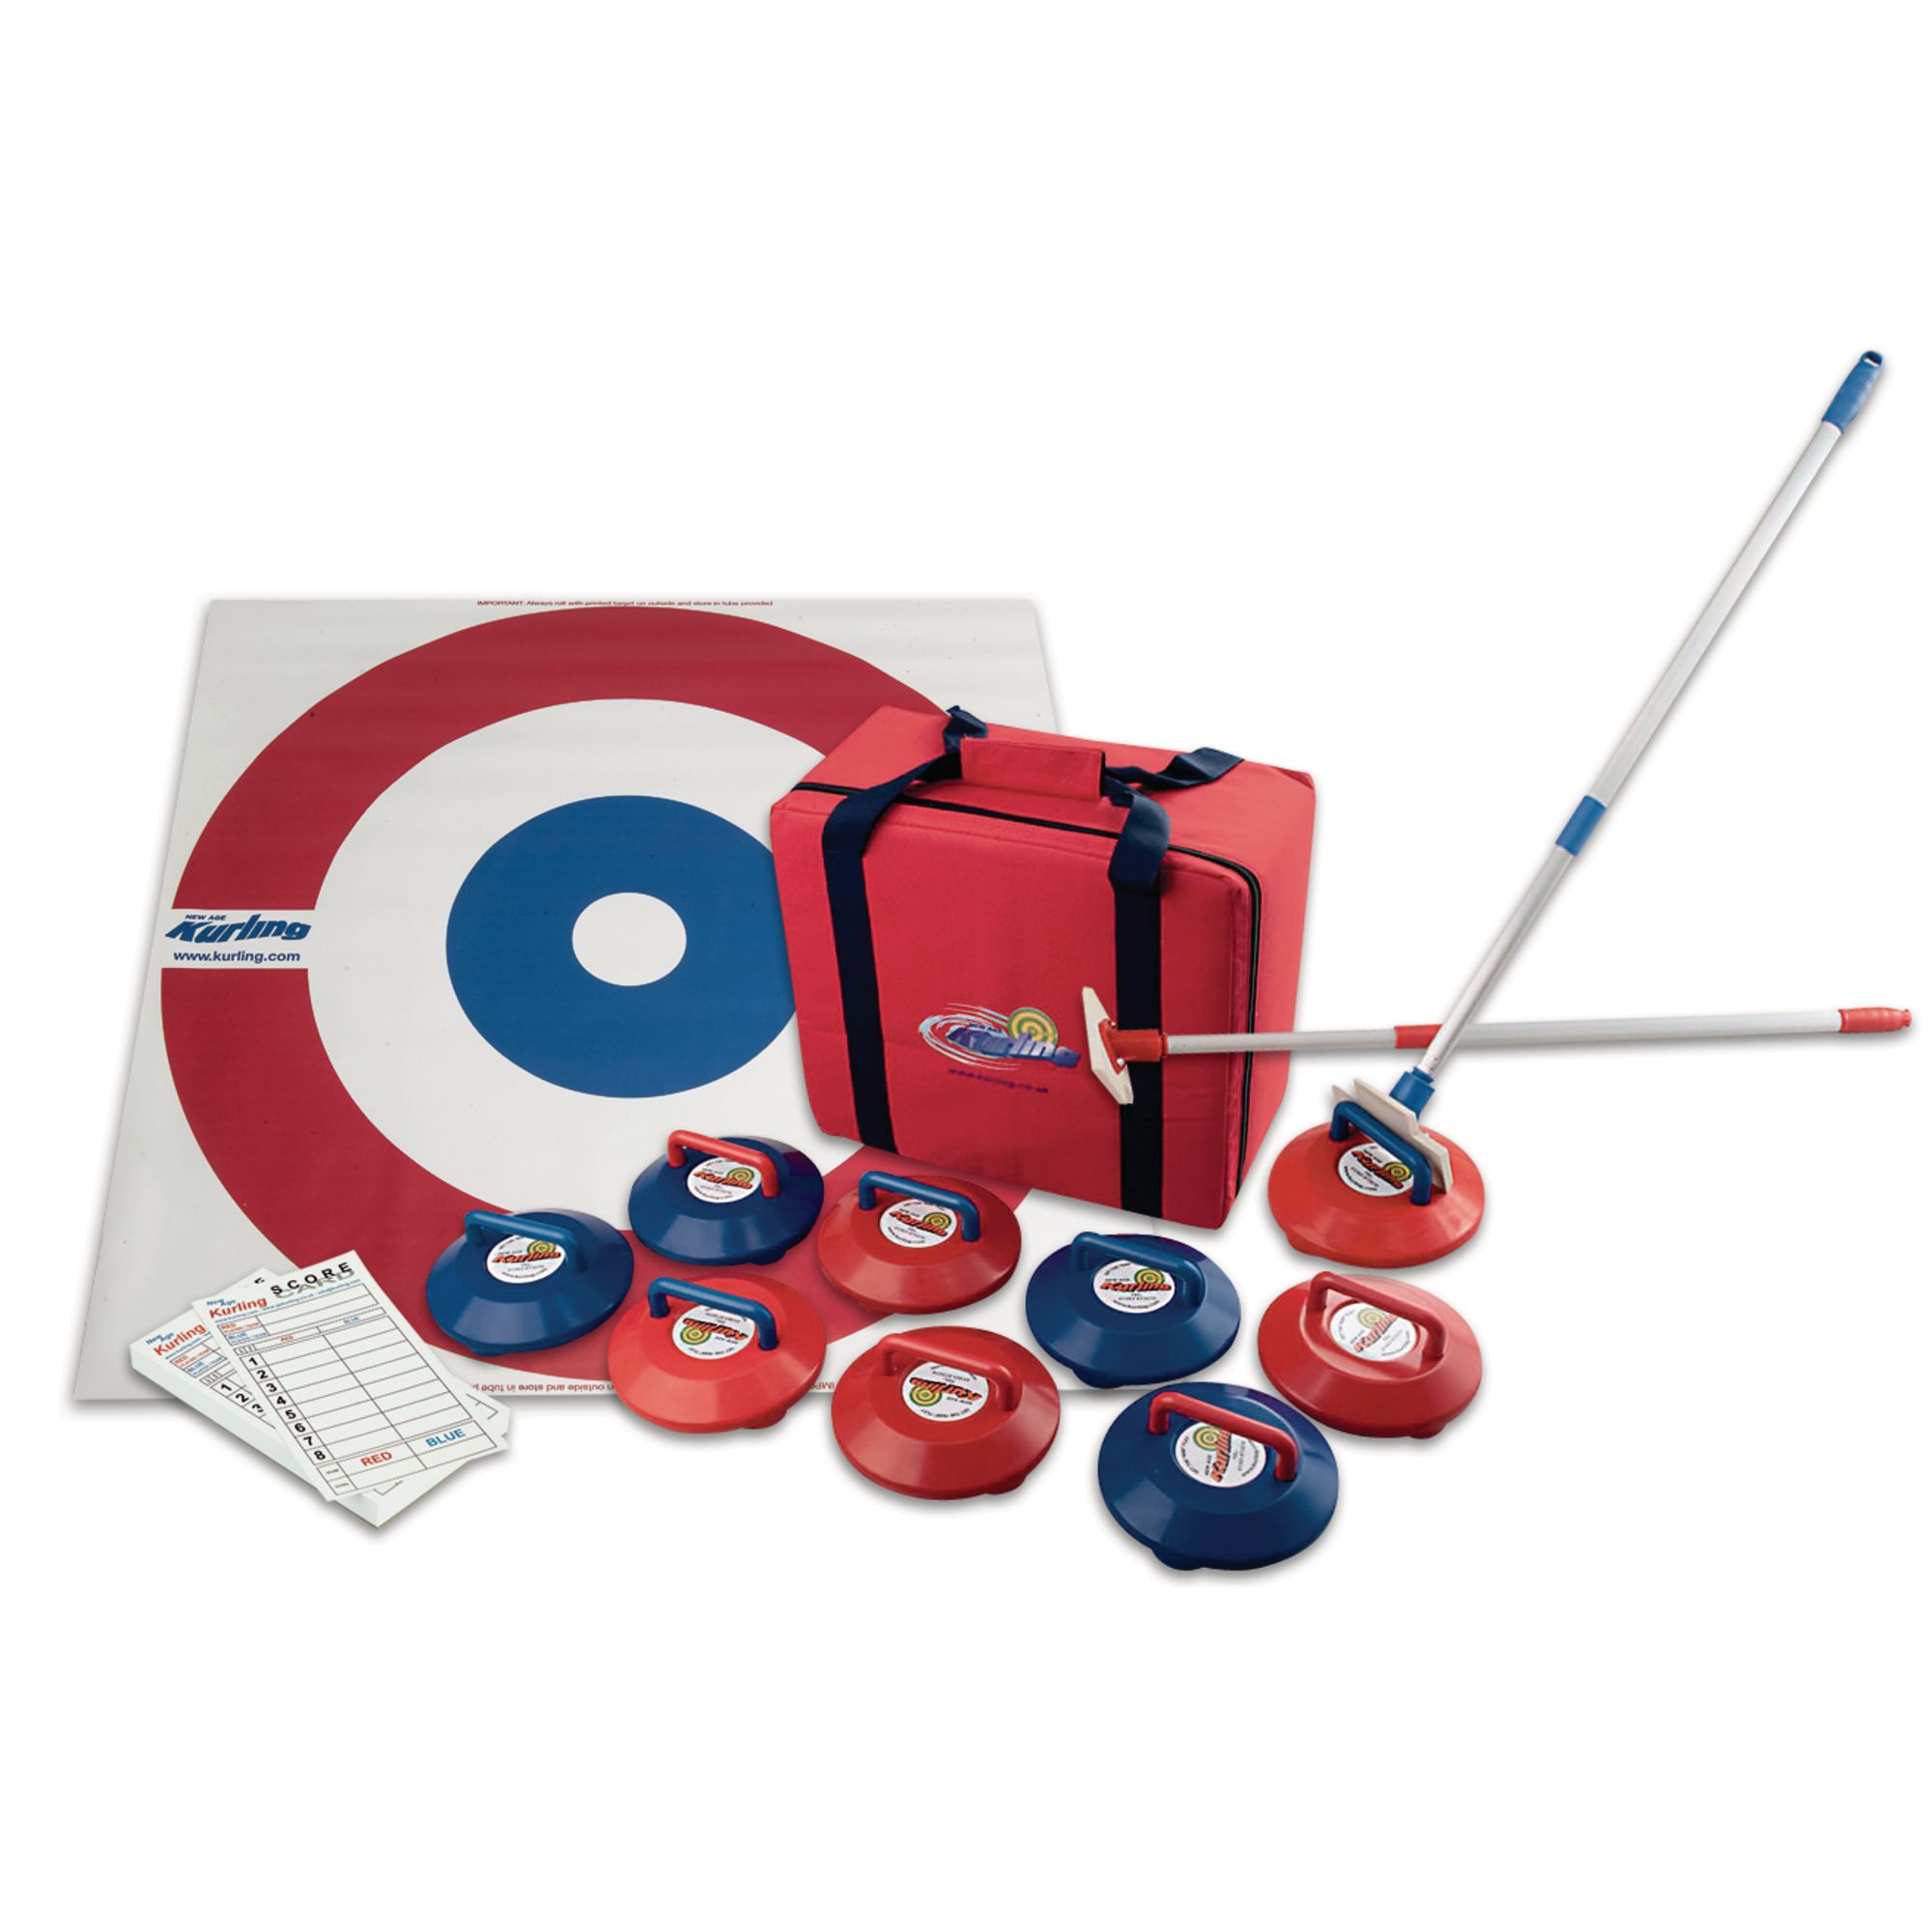 New Age Kurling Competition Set